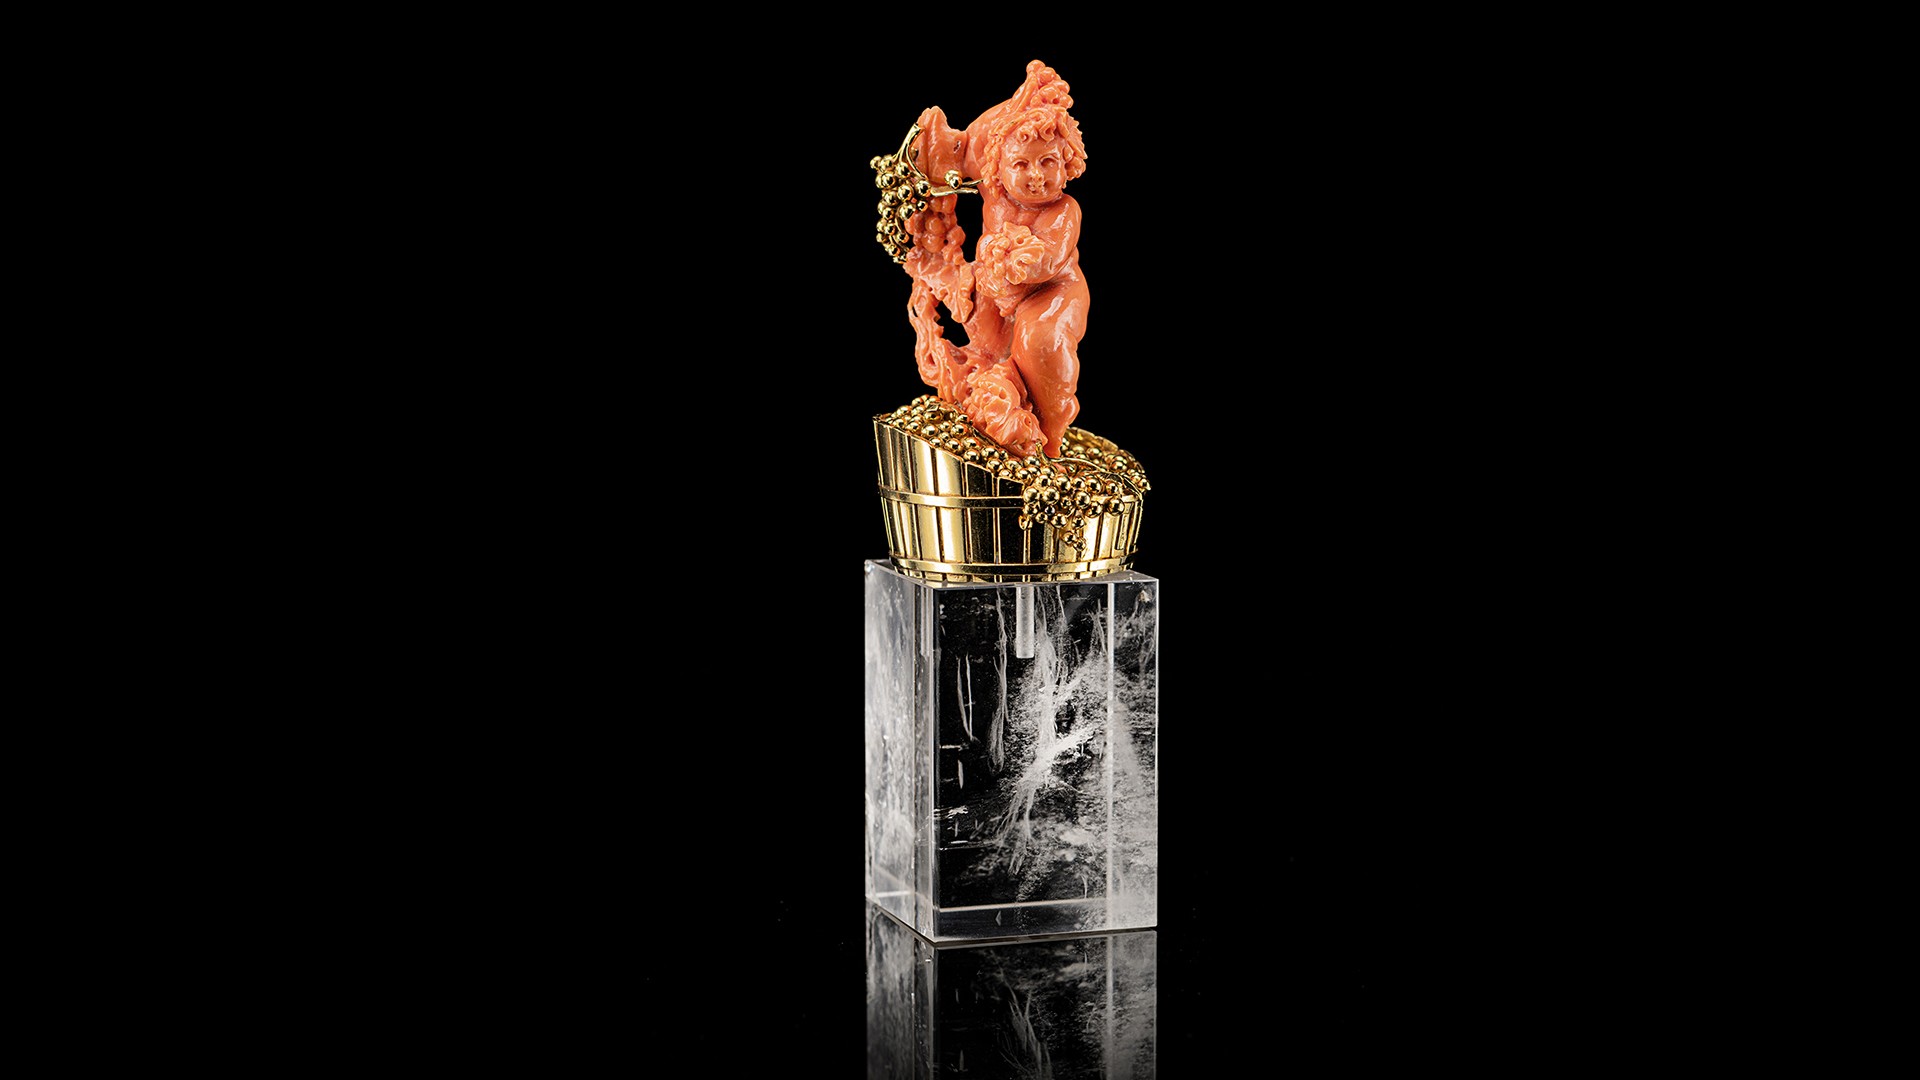 red coral statuette with golden details